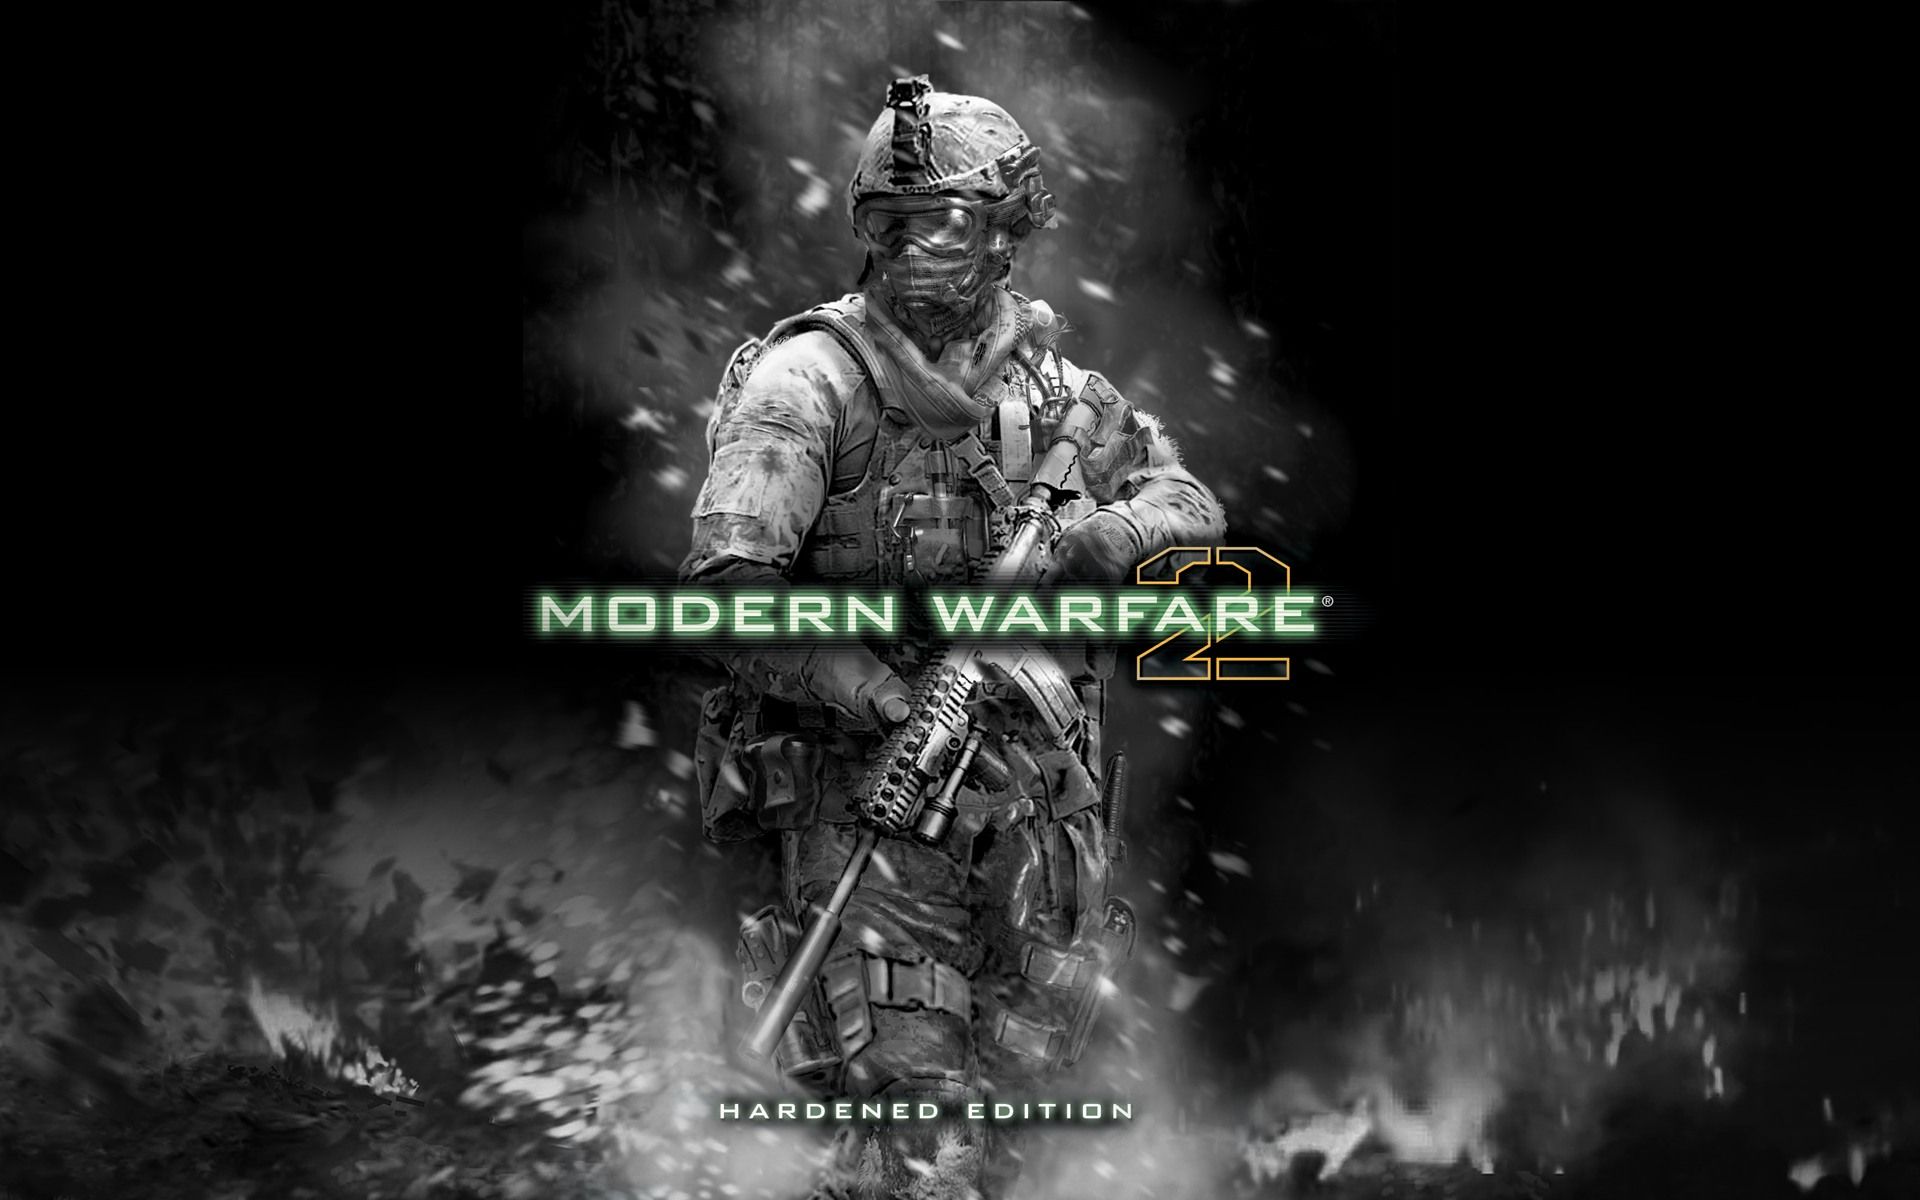 Cool Call of Duty Modern Warfare 4 Wallpaper. Xbox Wallpaper Call of D, Secret Diary of a Call Girl Wallpaper and Call of Duty Background